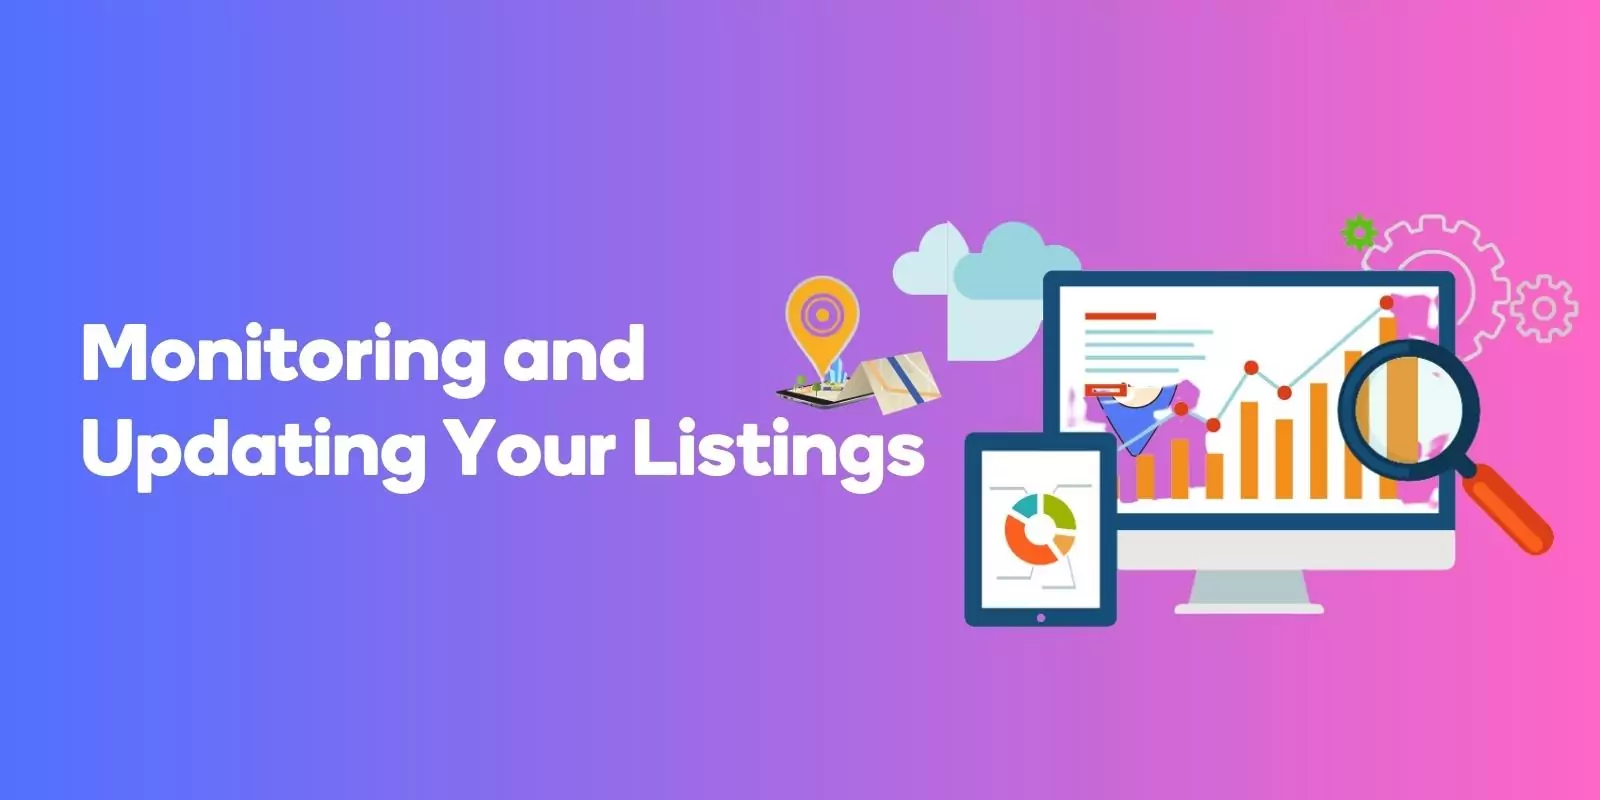 Monitoring and Updating Your Listings